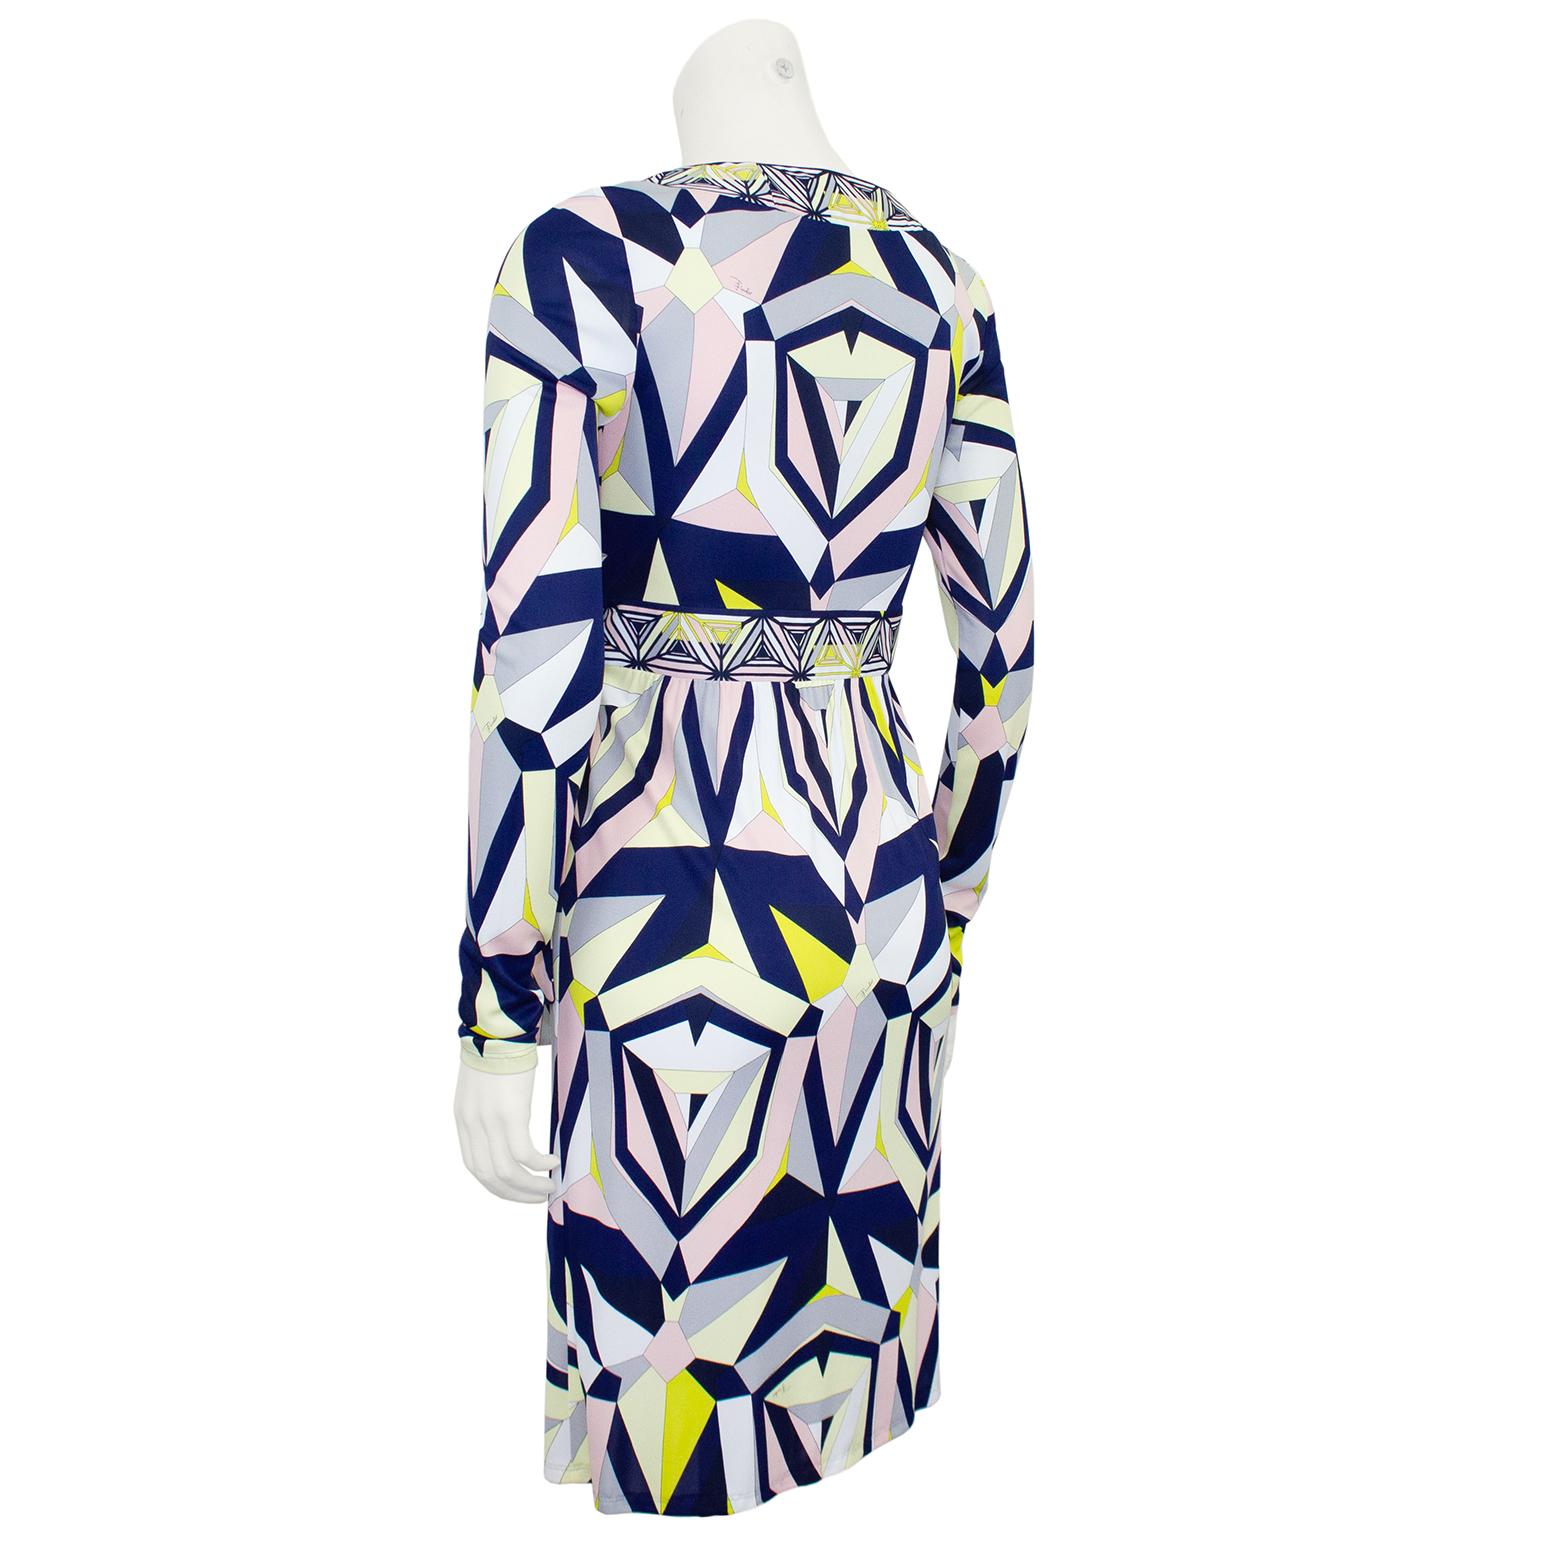 2000s Emilio Pucci Navy and Yellow Printed Wrap Dress In Good Condition For Sale In Toronto, Ontario